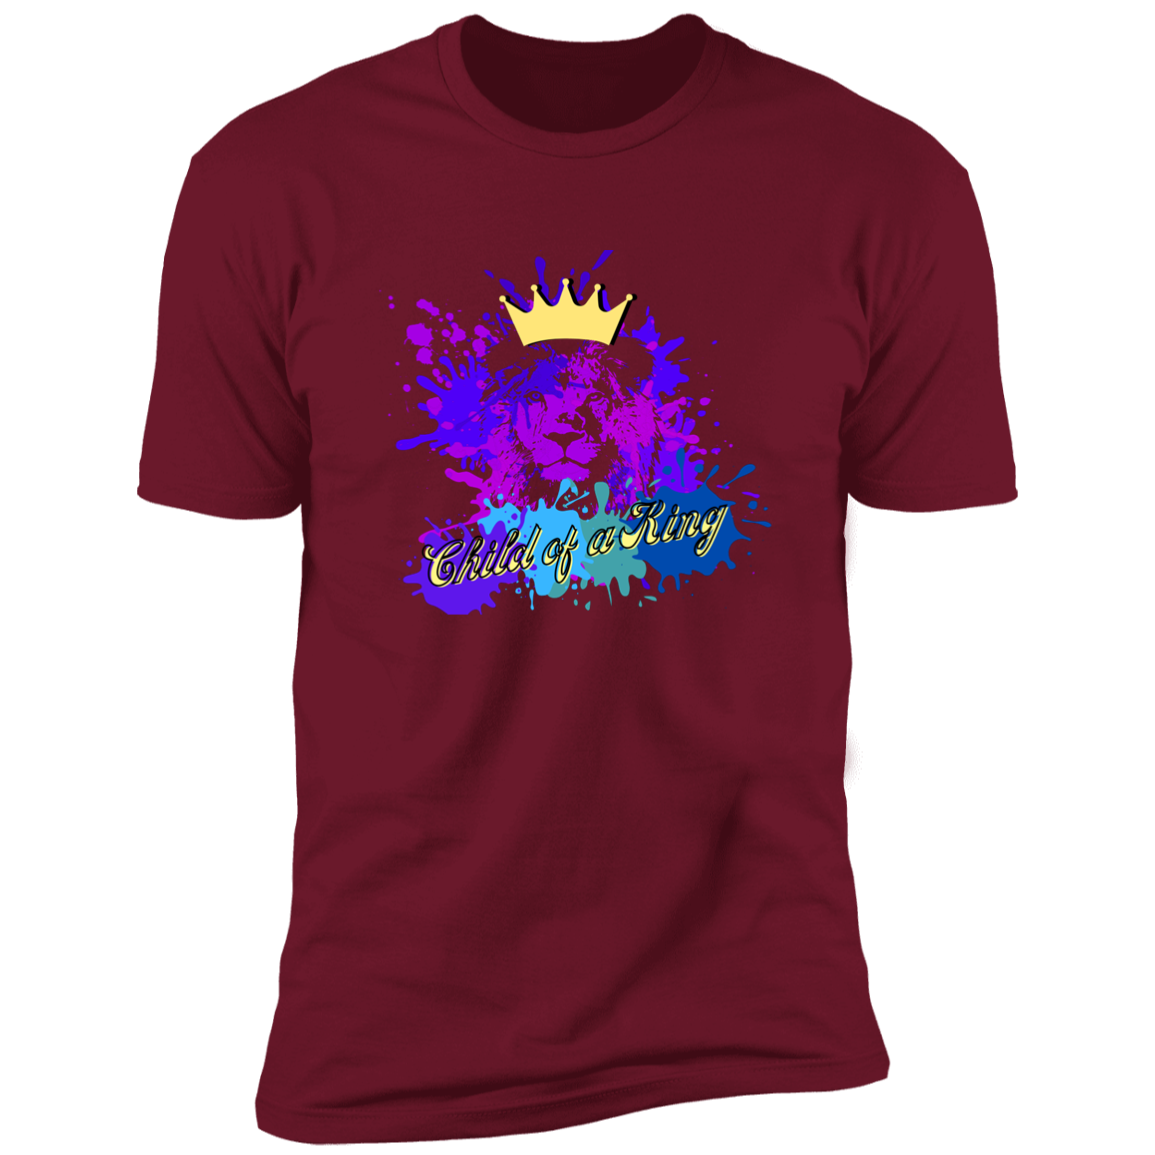 Child of a King Dynamic T-Shirt